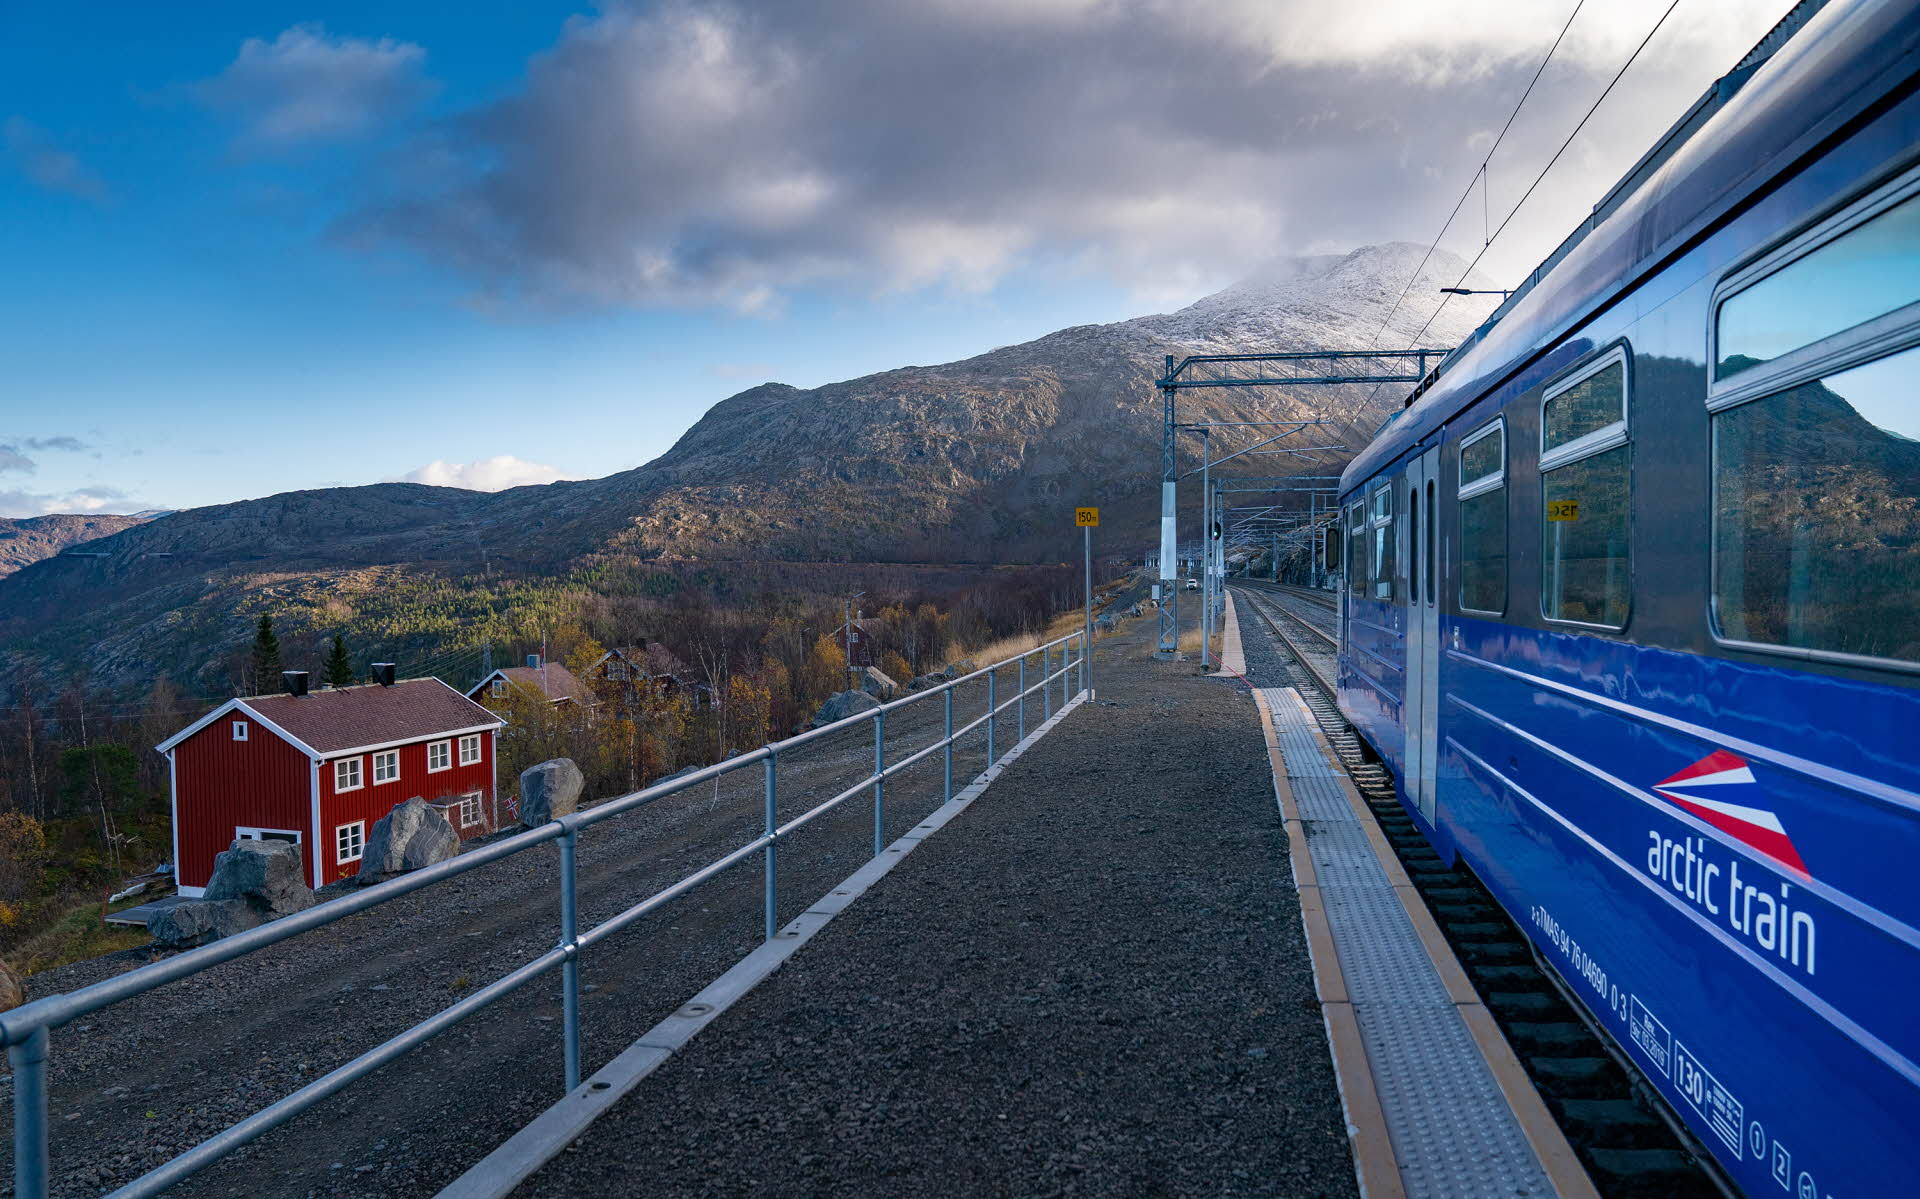 The blue Arctic Train at Rombak station with a red building and mountains nearby